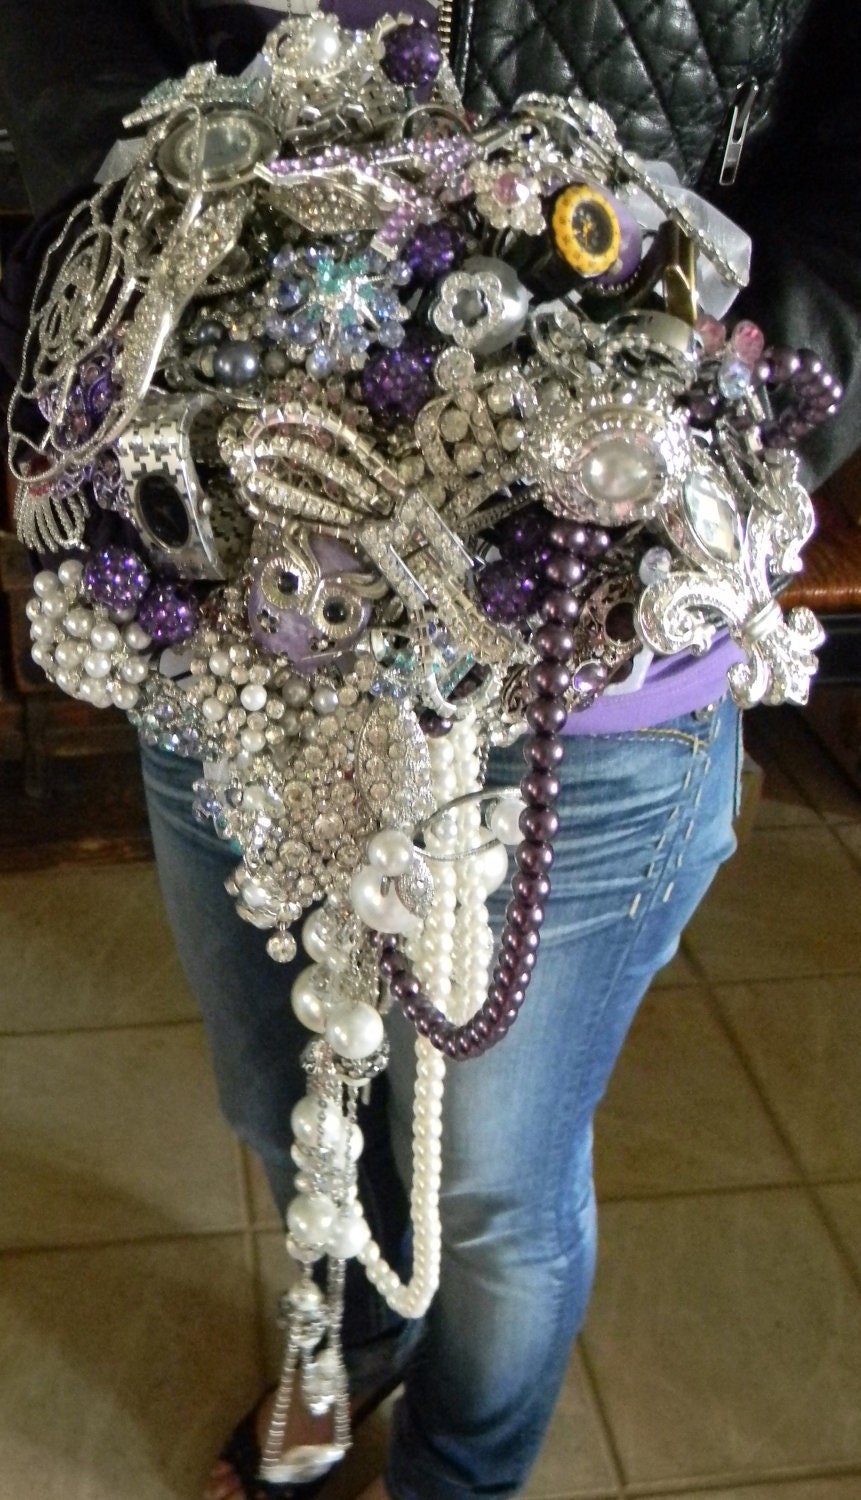 Home of the Brooch Bouquet